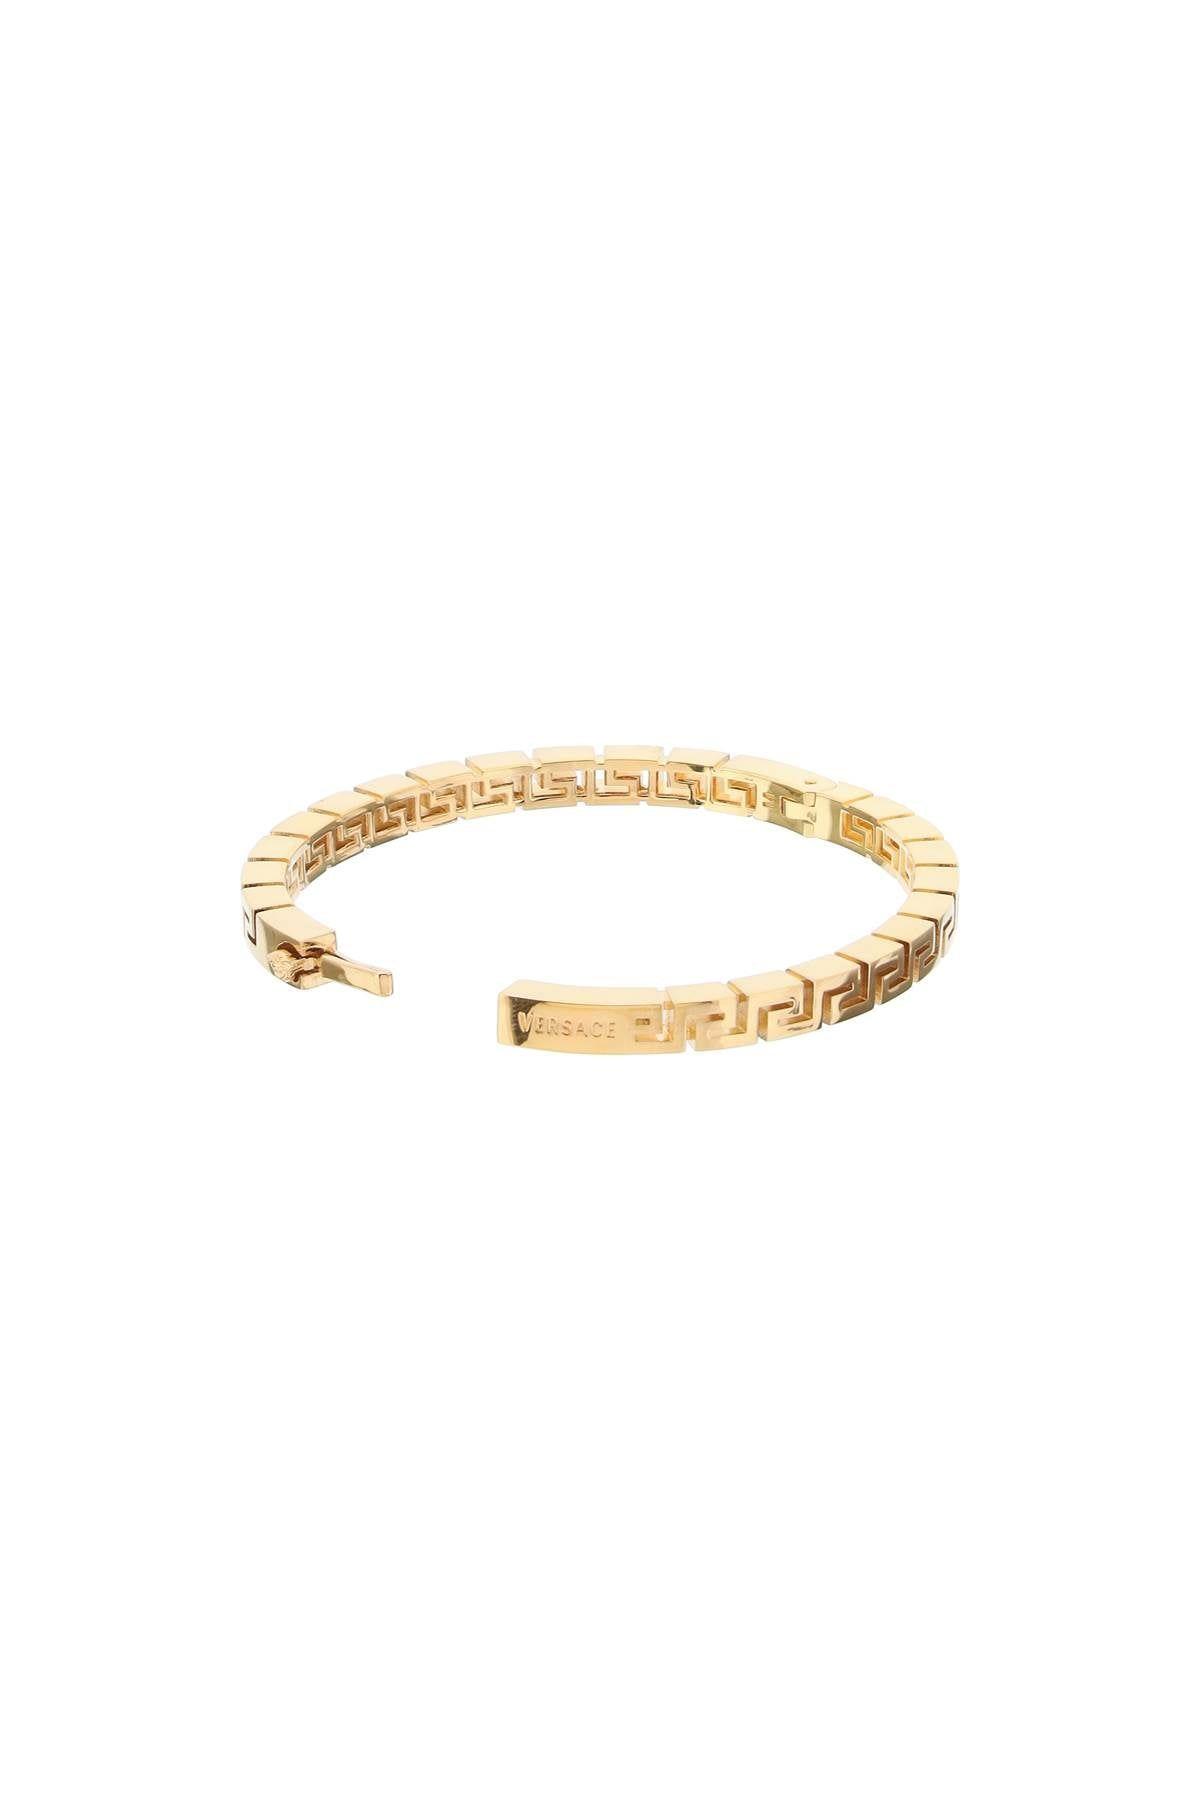 Versace Enamel & Gold Plated Bracelet Made In Italy